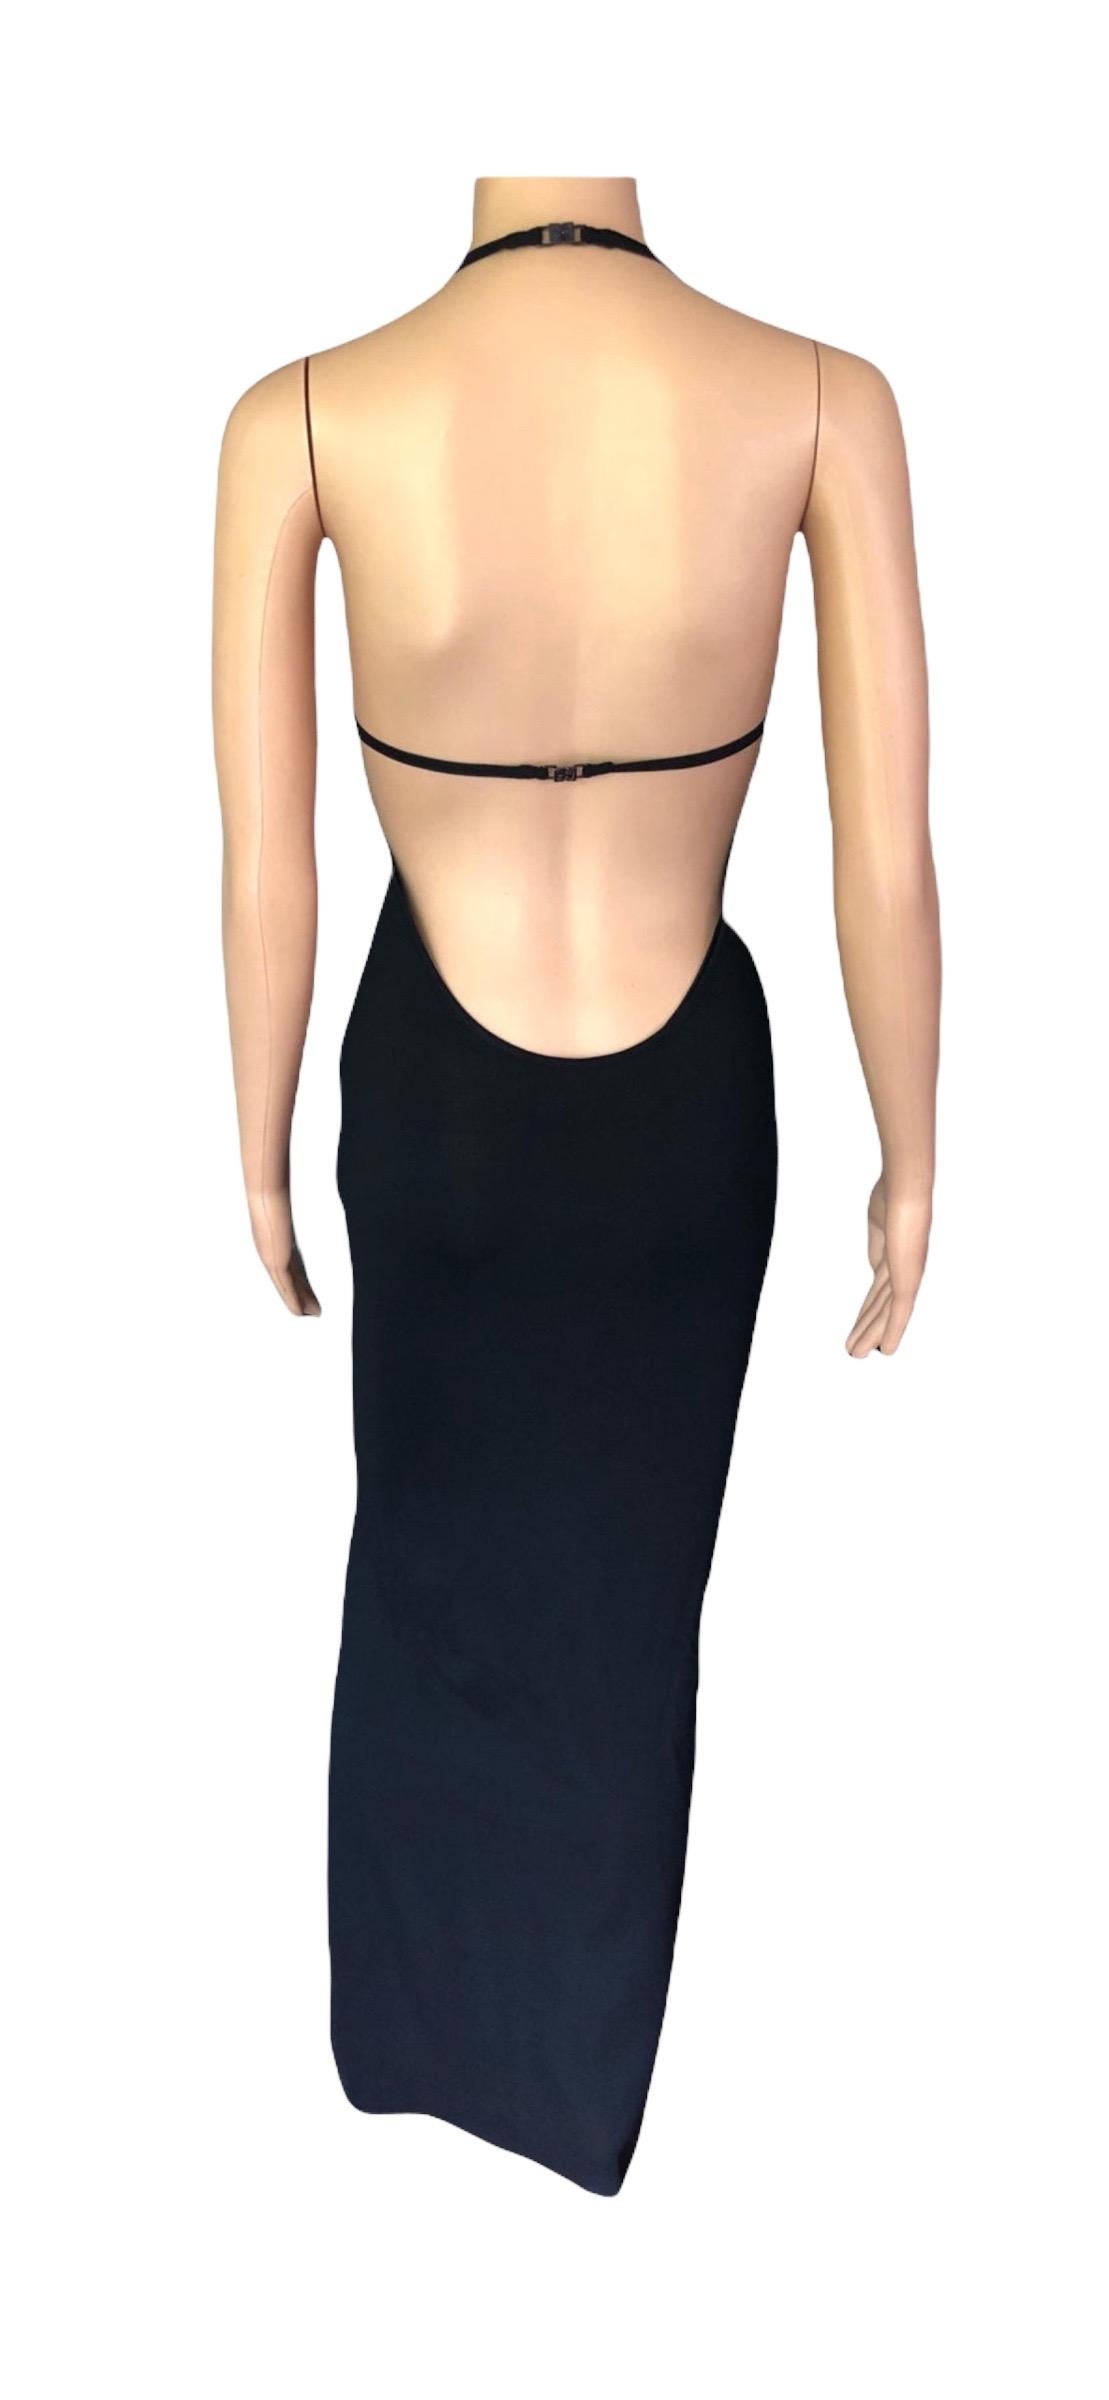 Tom Ford for Gucci S/S 1998 Bodycon Backless Black Evening Dress Gown For Sale 3